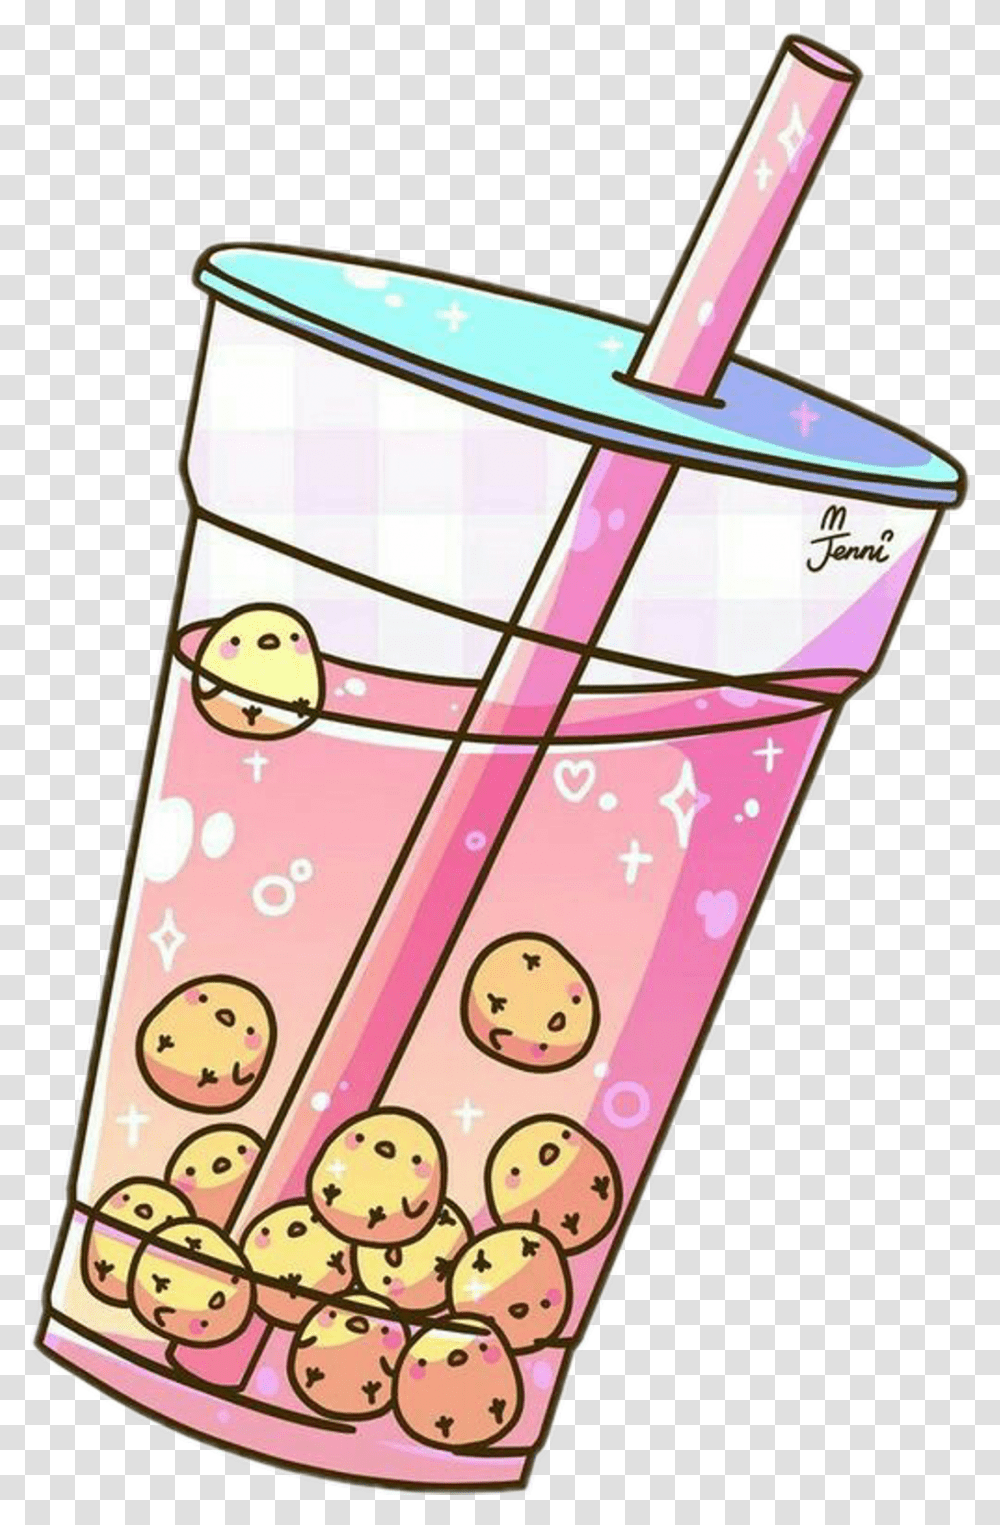 Foodie Bubbletea Tea Pastelcolors Girly Drinkstickers Aesthetic Boba Tea Stickers, Mobile Phone, Electronics, Cell Phone Transparent Png